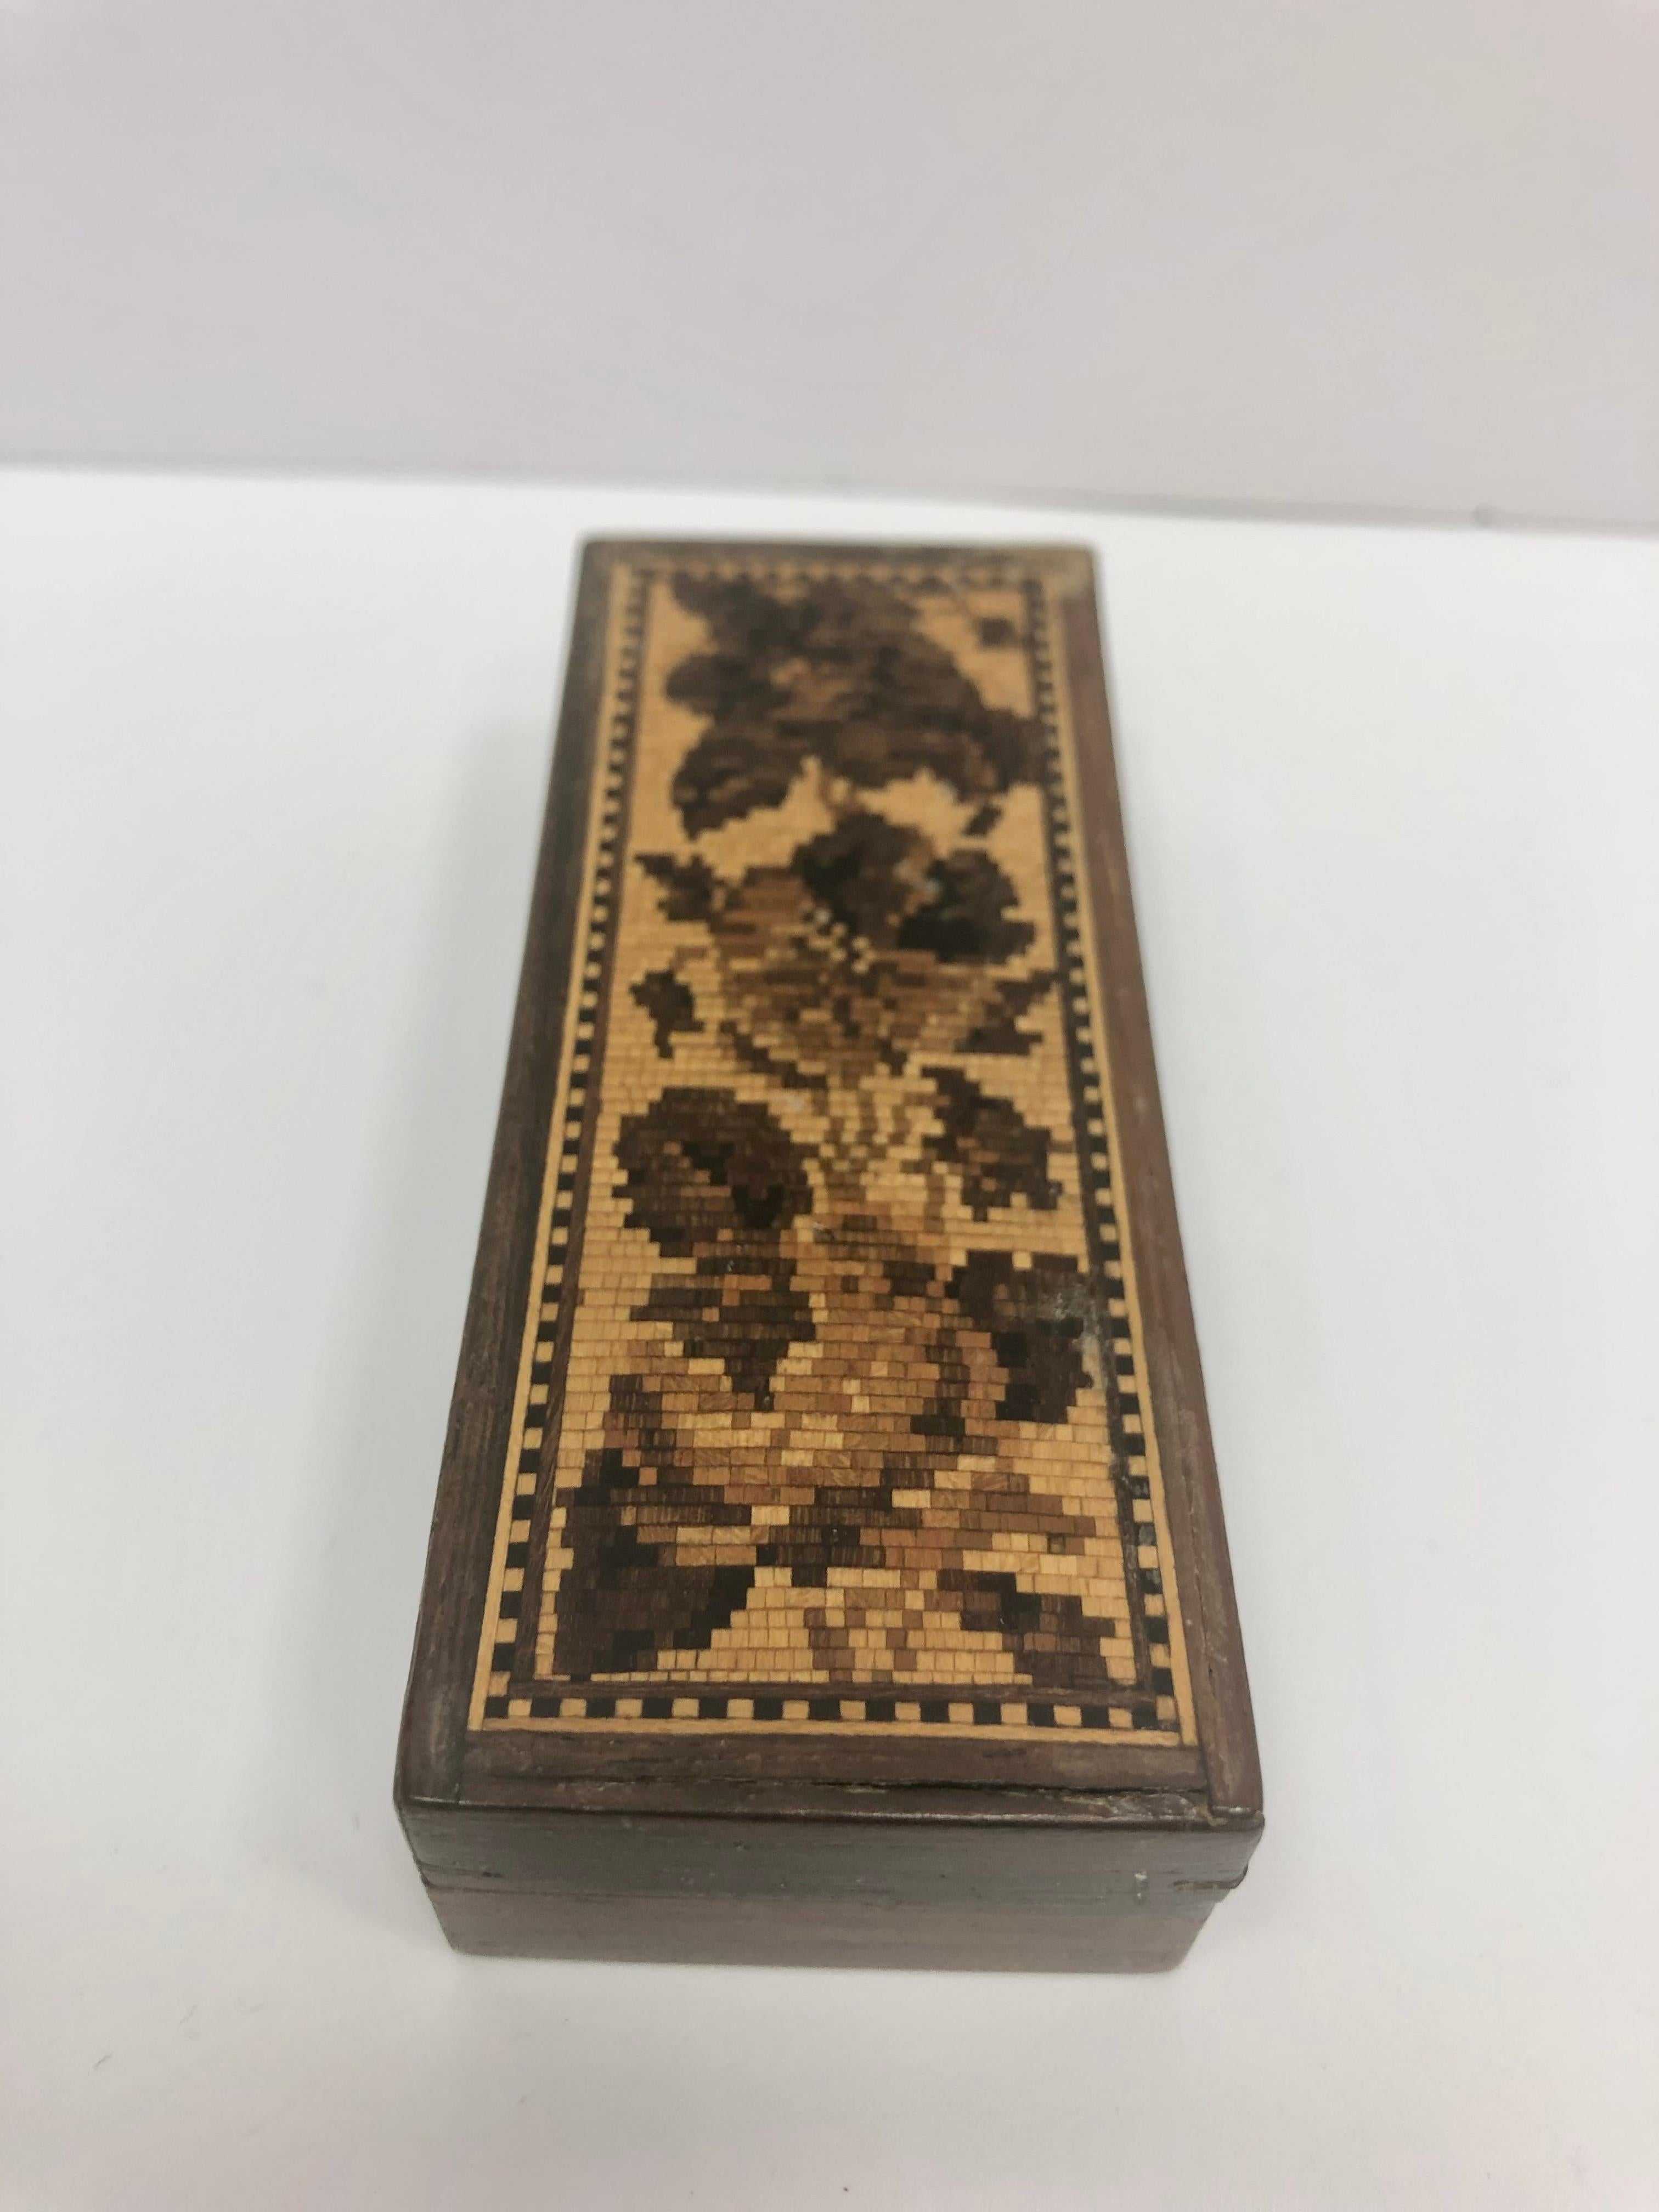 Tunbridge trinket box made in England in the 1870s. Wooden floral design. Tunbridge wooden trinket box made in England in the 1870s. Tunbridge ware is a form of decoratively inlaid woodwork, typically in the form of boxes, that is characteristic of